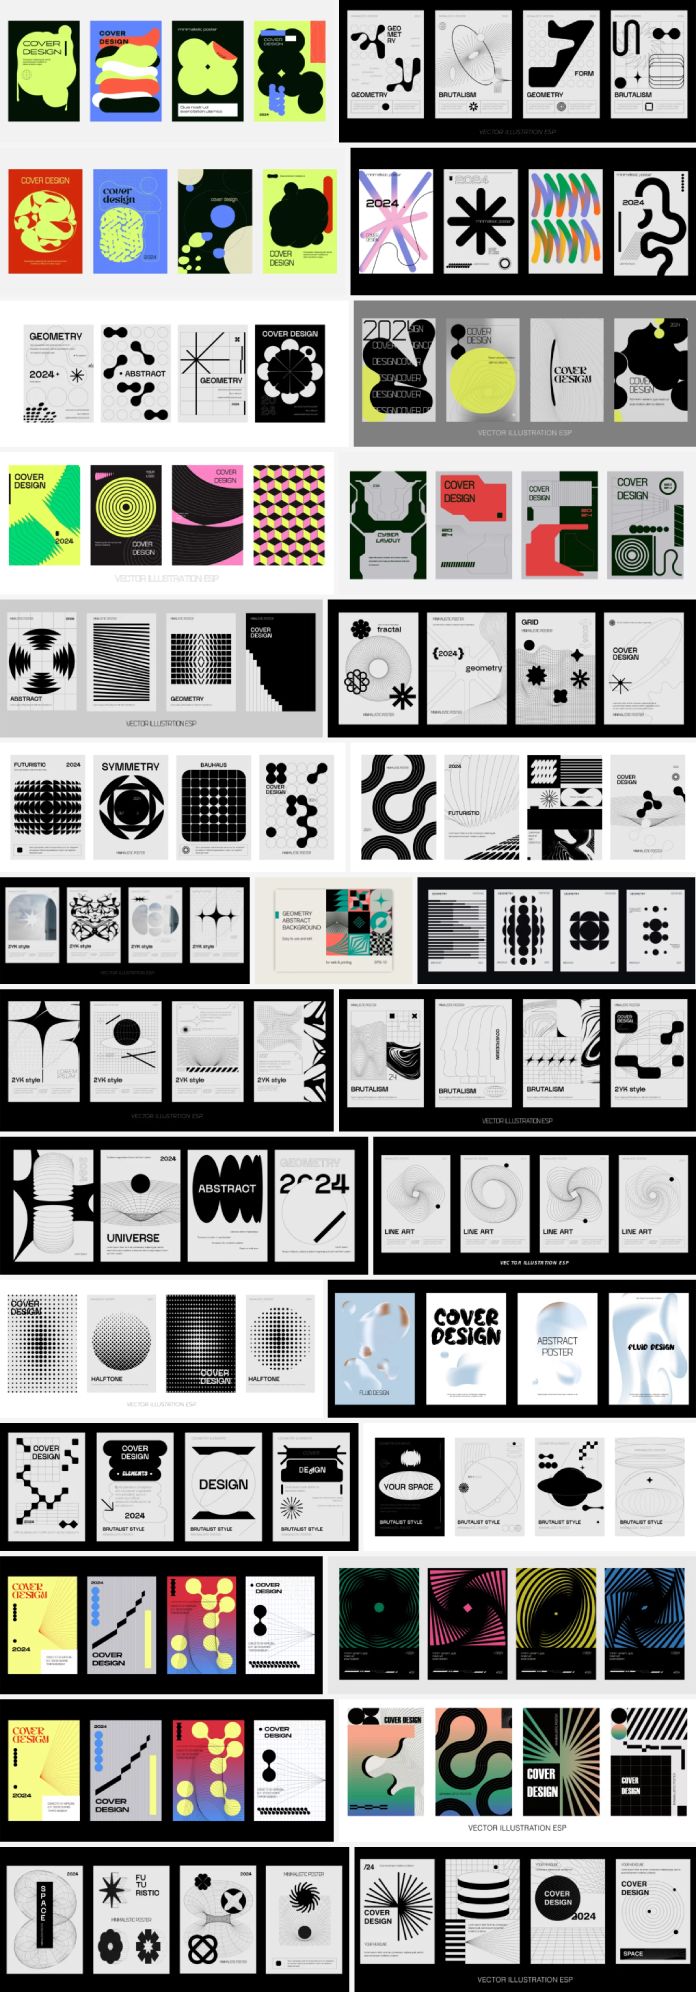 Download minimalist abstract design templates as vector graphics for posters and other design applications.